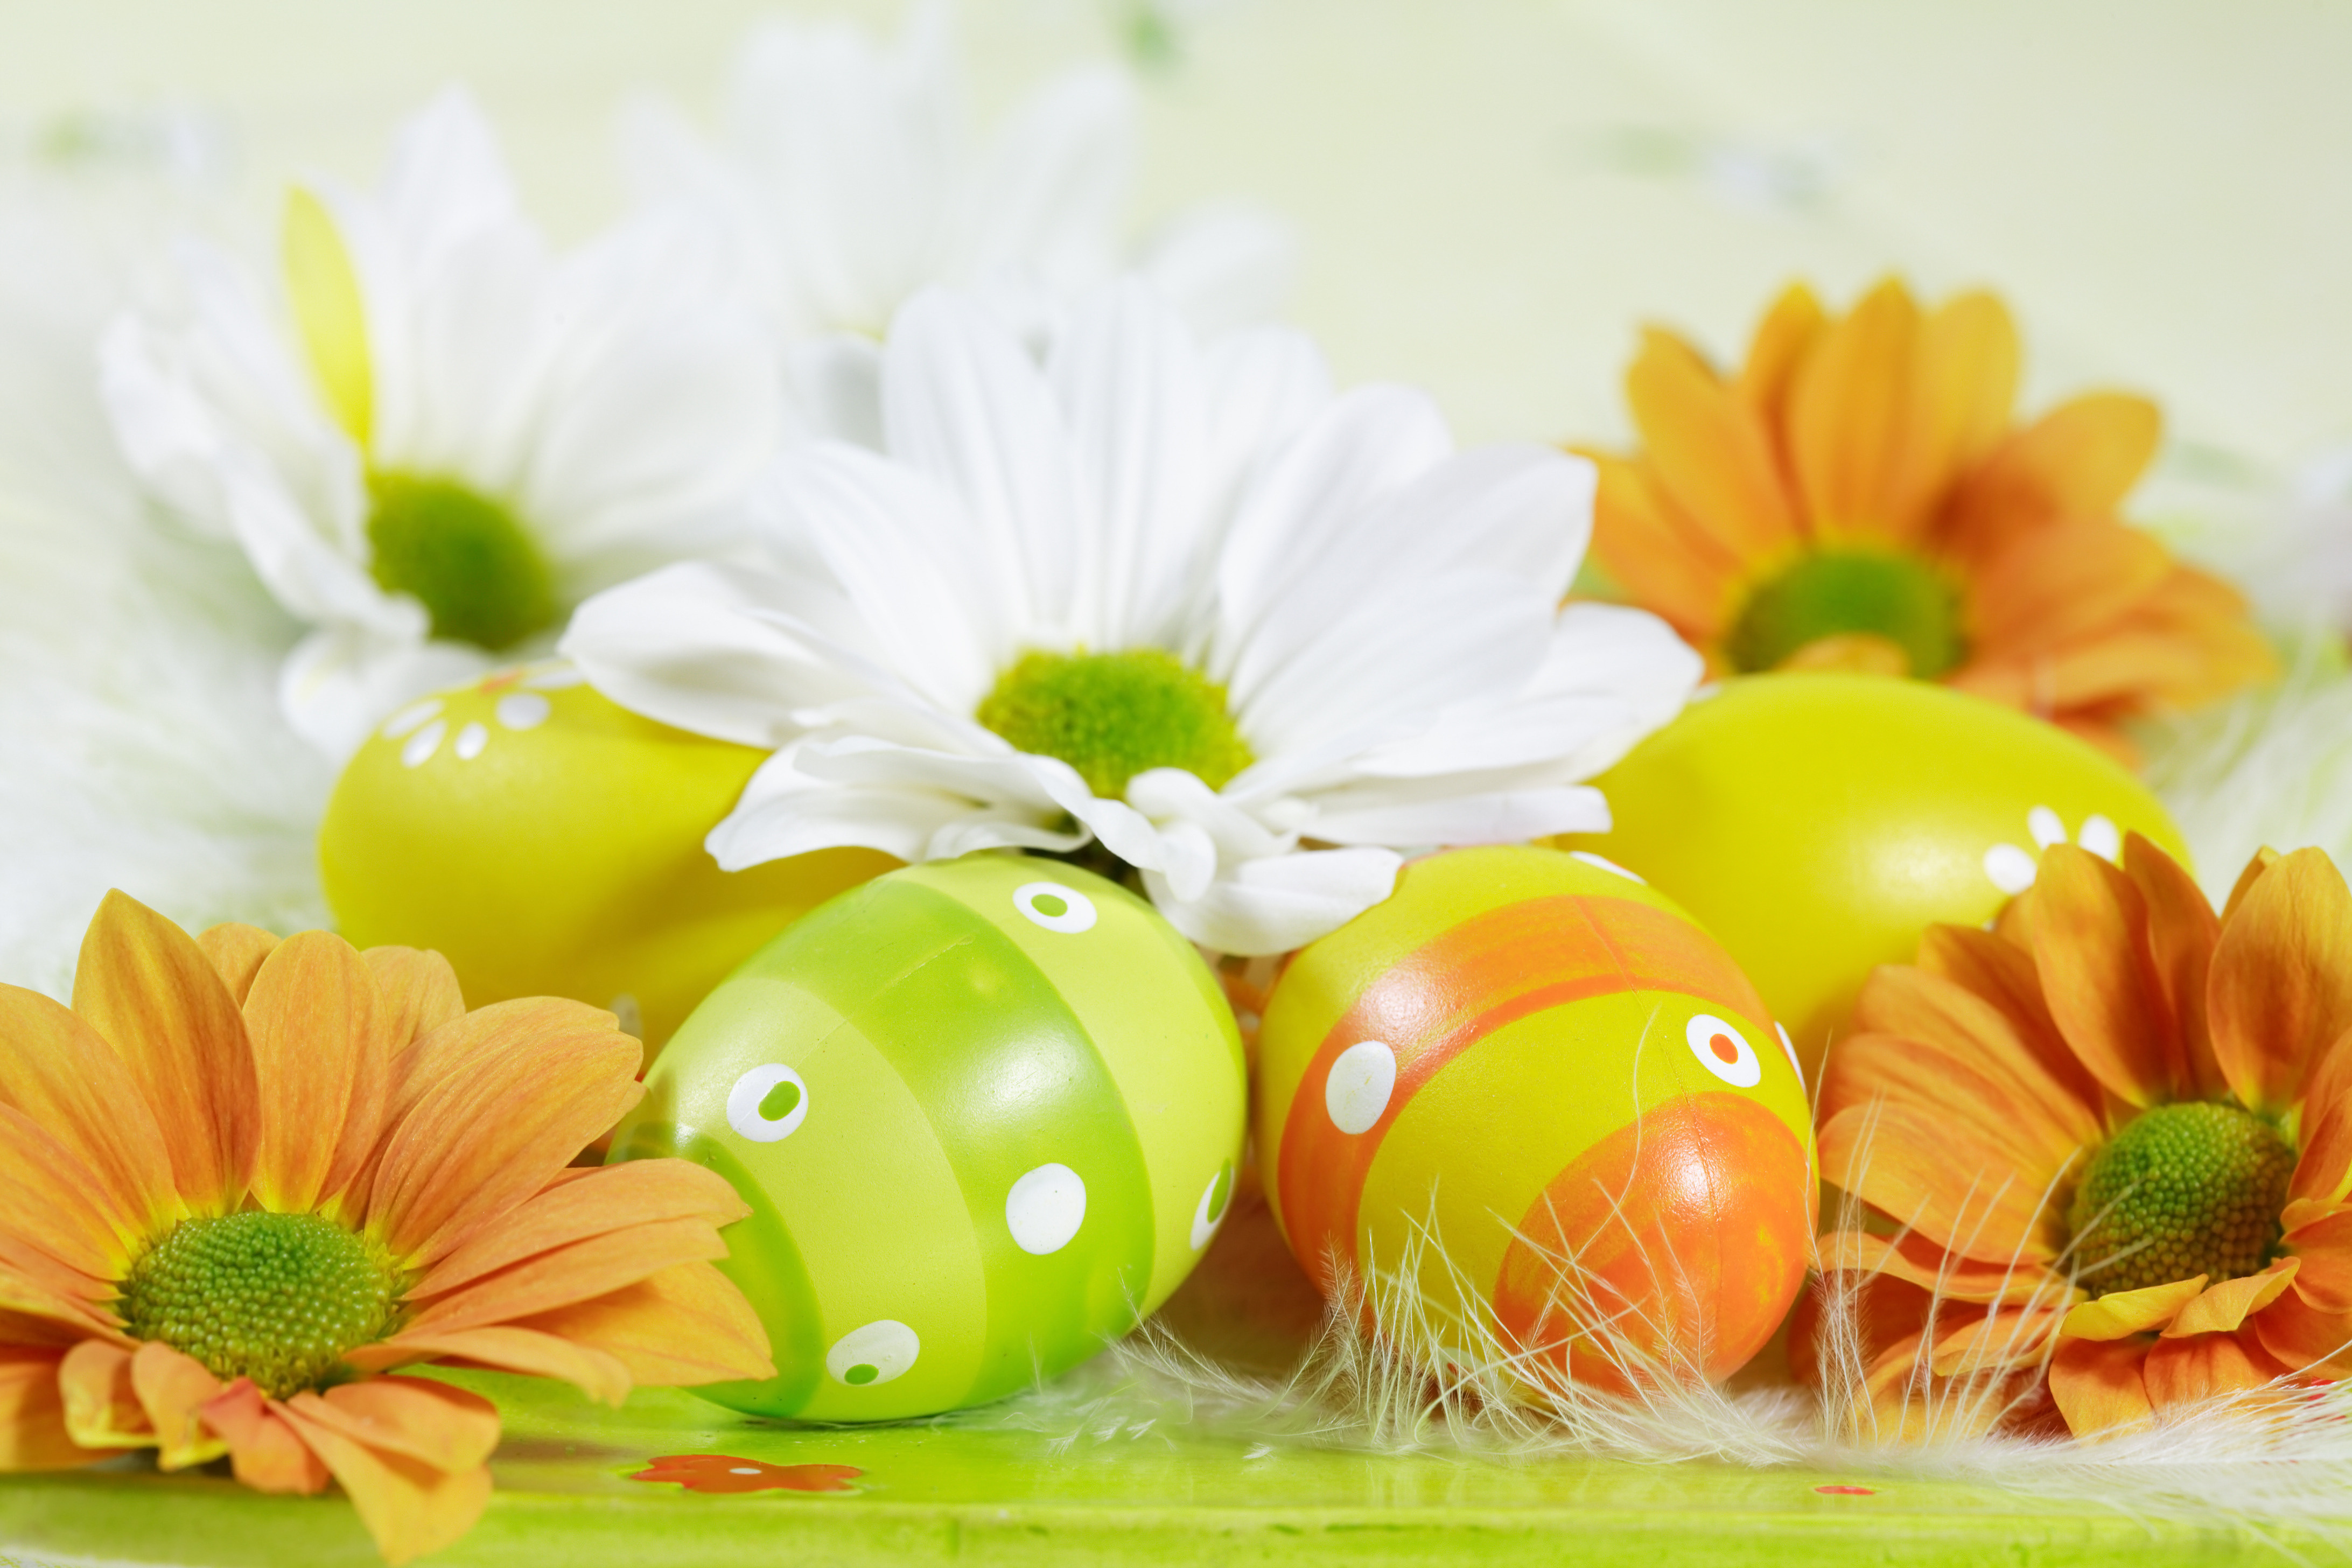 Eggs among flowers on Easter wallpapers and images